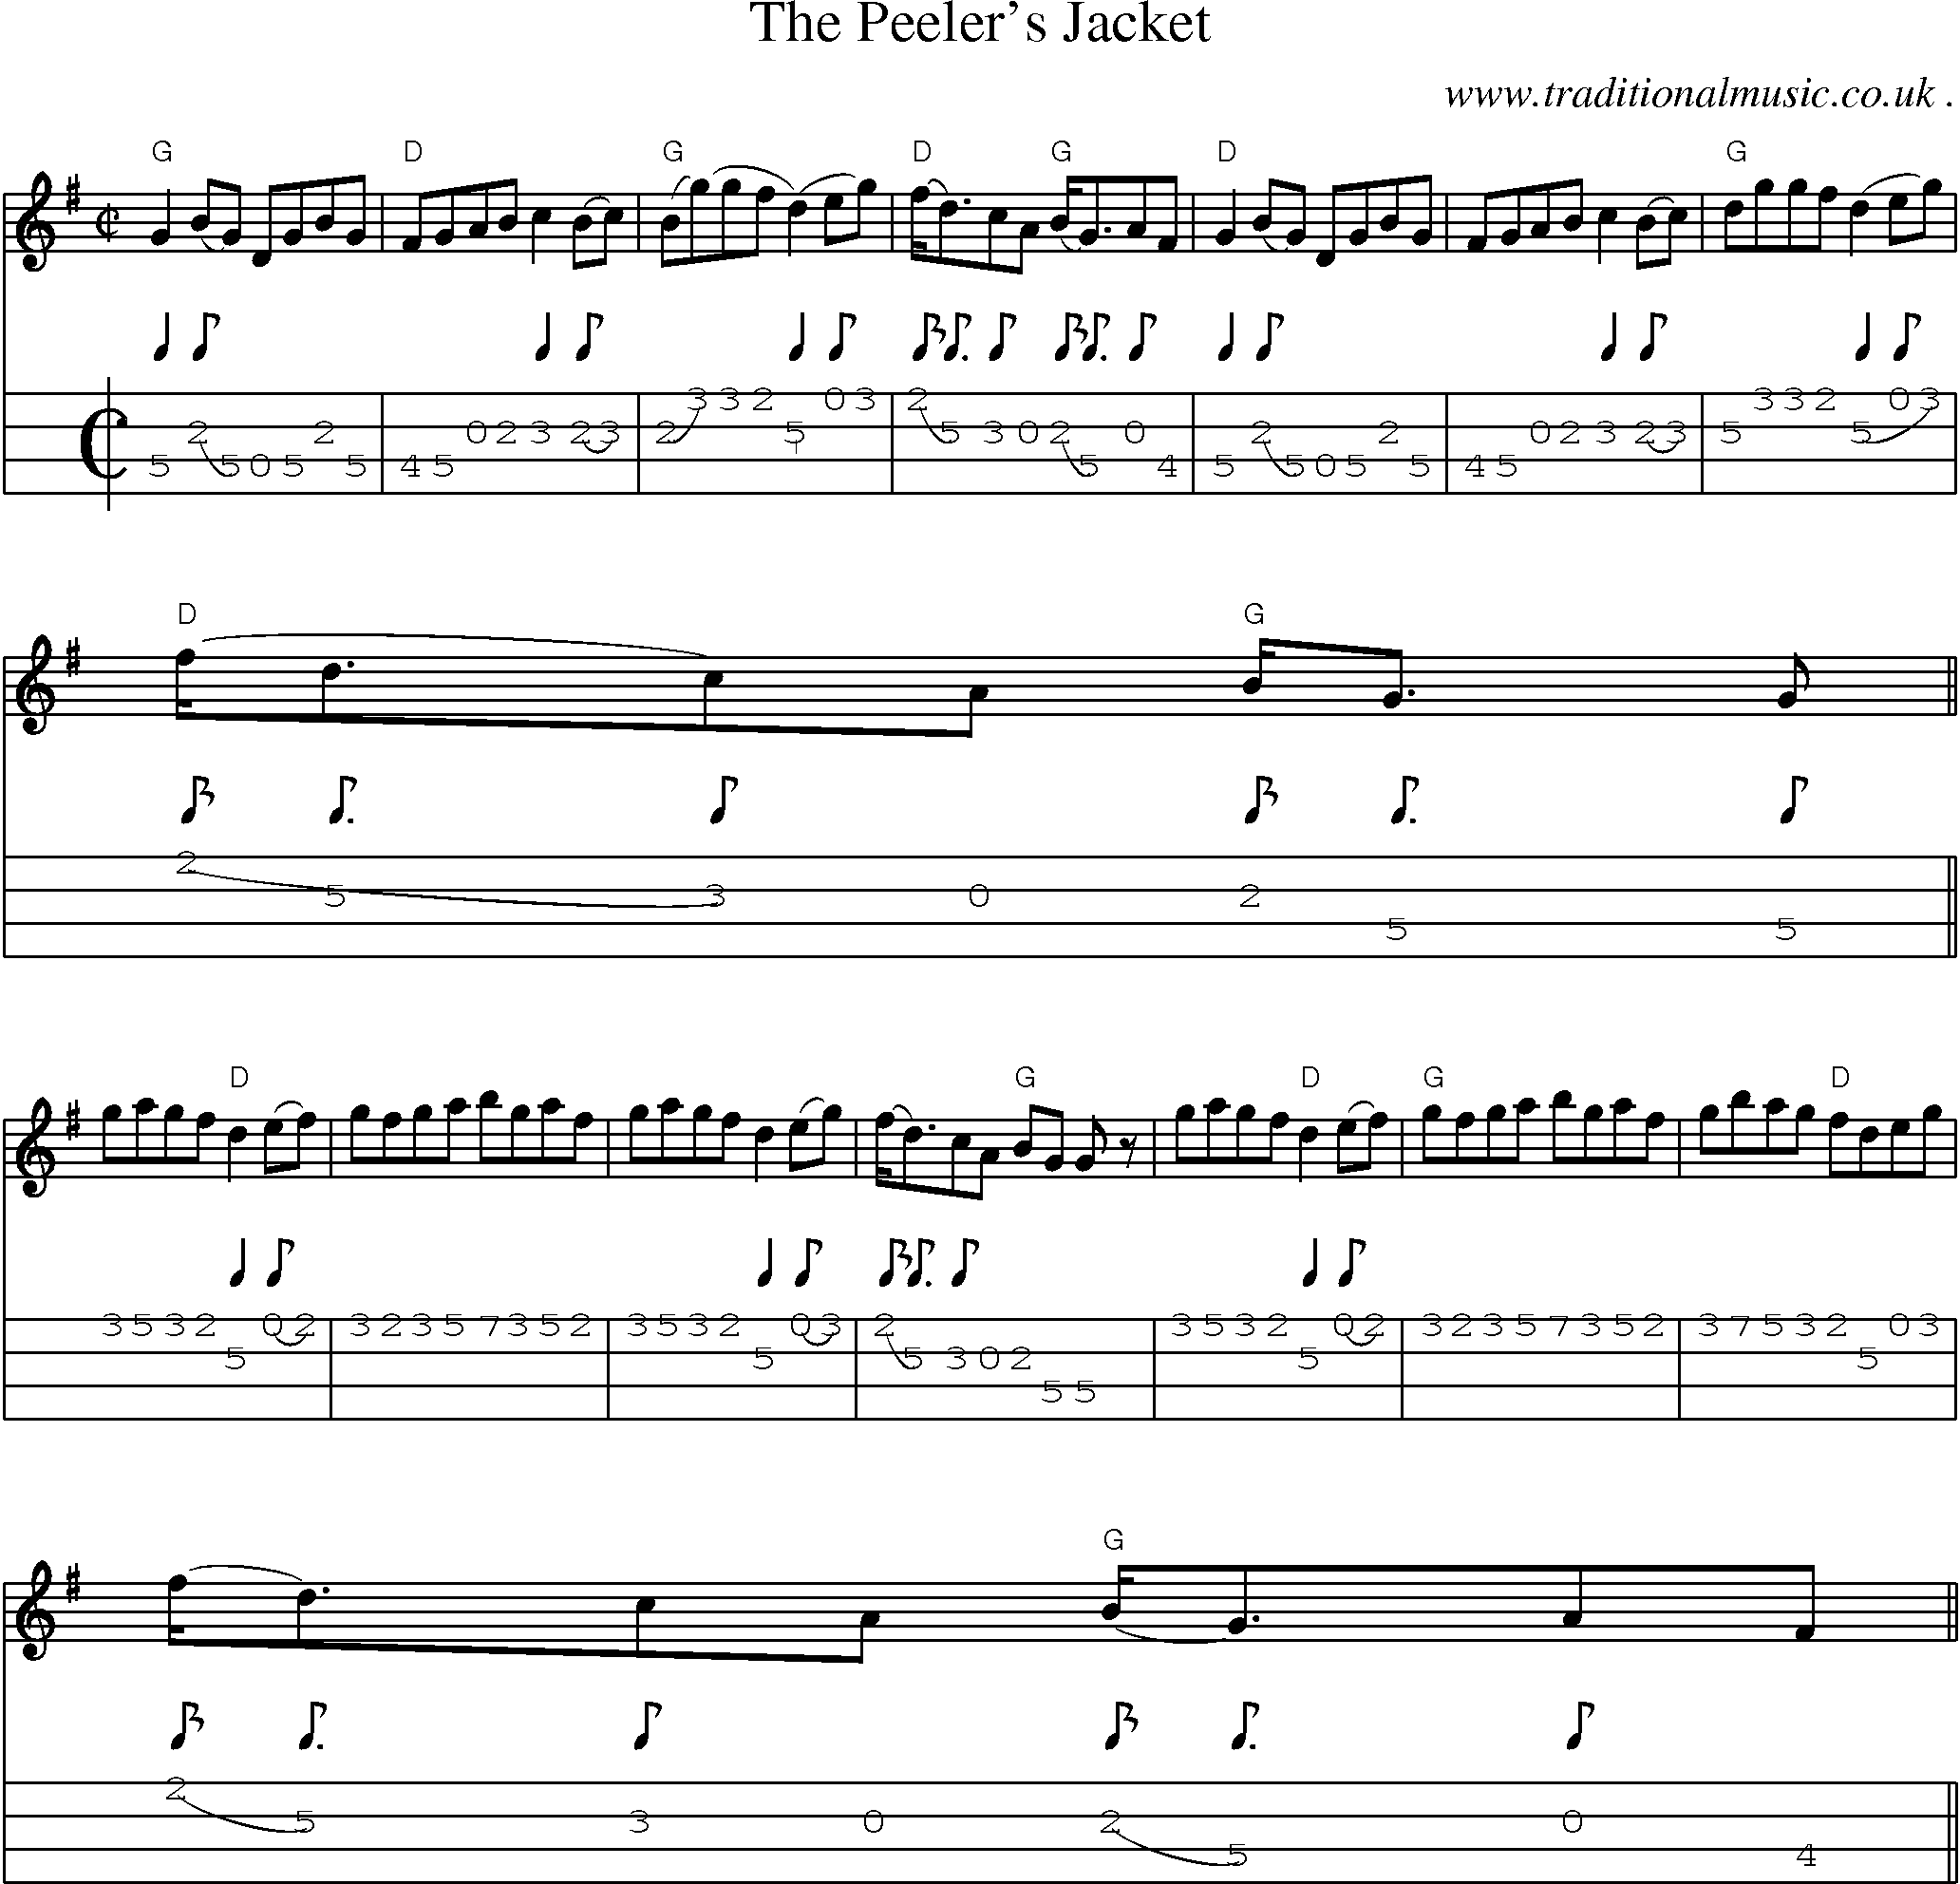 Music Score and Guitar Tabs for The Peelers Jacket